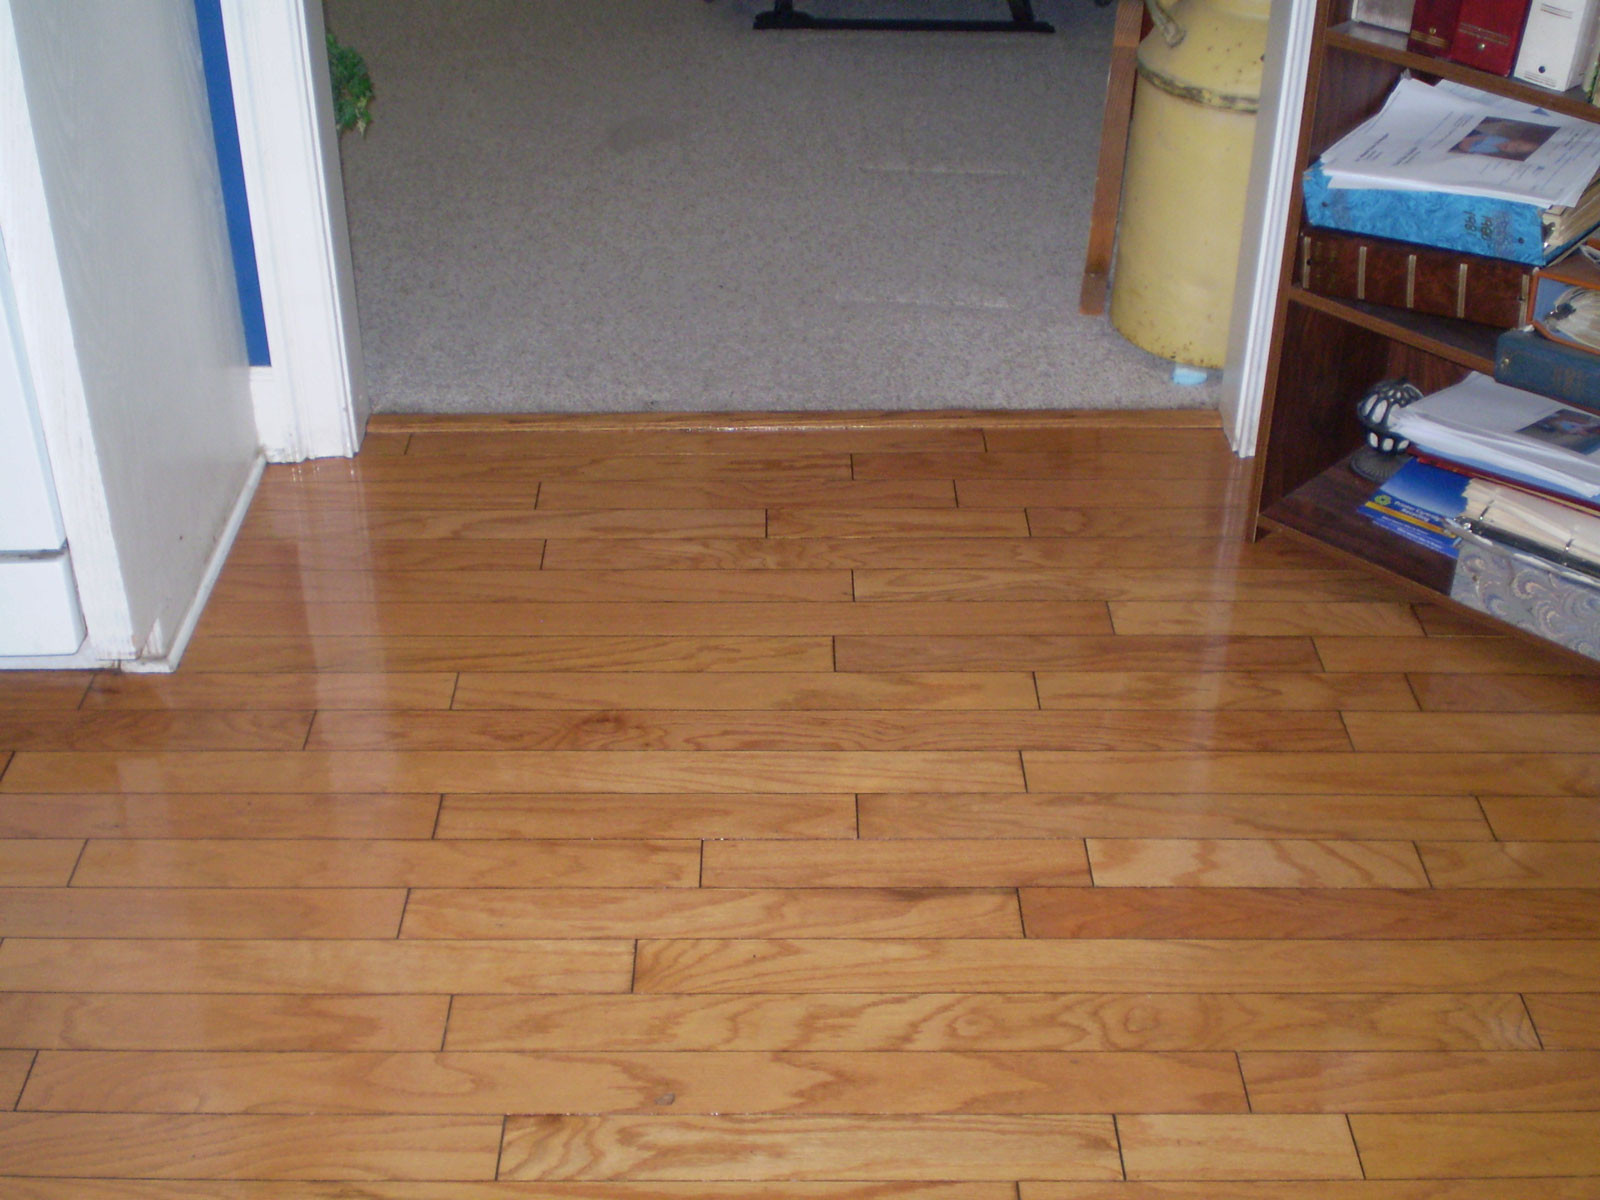 20 Great B and Q Hardwood Flooring 2024 free download b and q hardwood flooring of hardwood floor refinishing richmond va floor with regard to hardwood floor refinishing richmond va will refinishingod floors pet stains old without sanding wood 